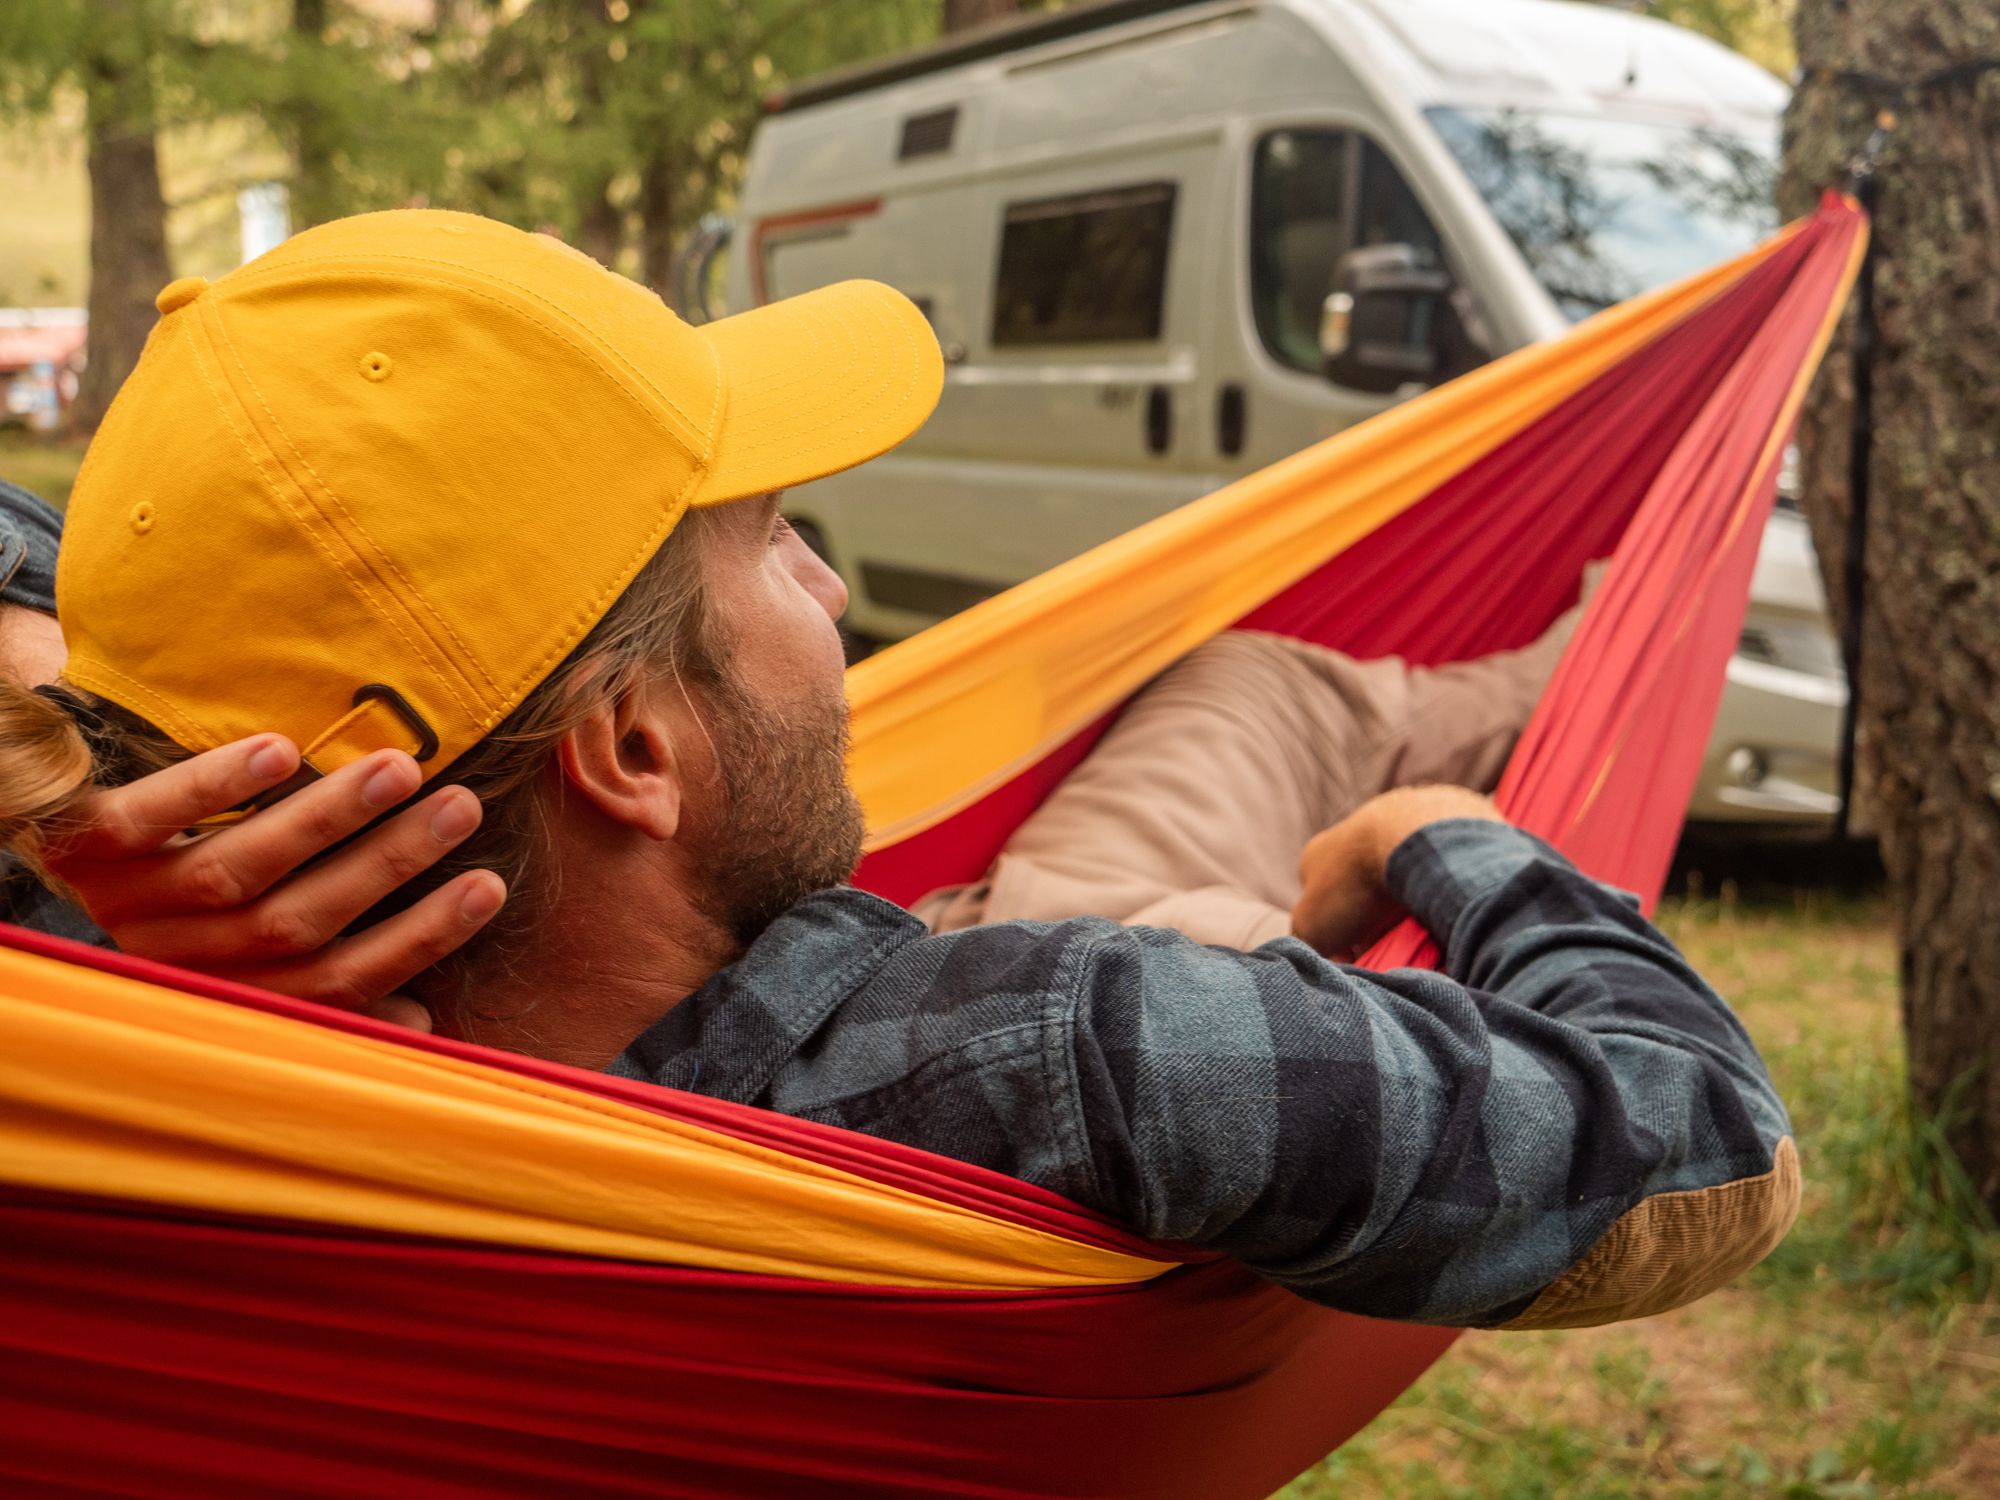 <p>According to reports from the RVIA, an RV vacation can save a chunk of change. Compared with a traditional vacation, RV trips can be more than 60% cheaper than a stay offering similar accommodations. The convenience of having all your own supplies (and your own bed to sleep in) is also not lost on RVers.</p>